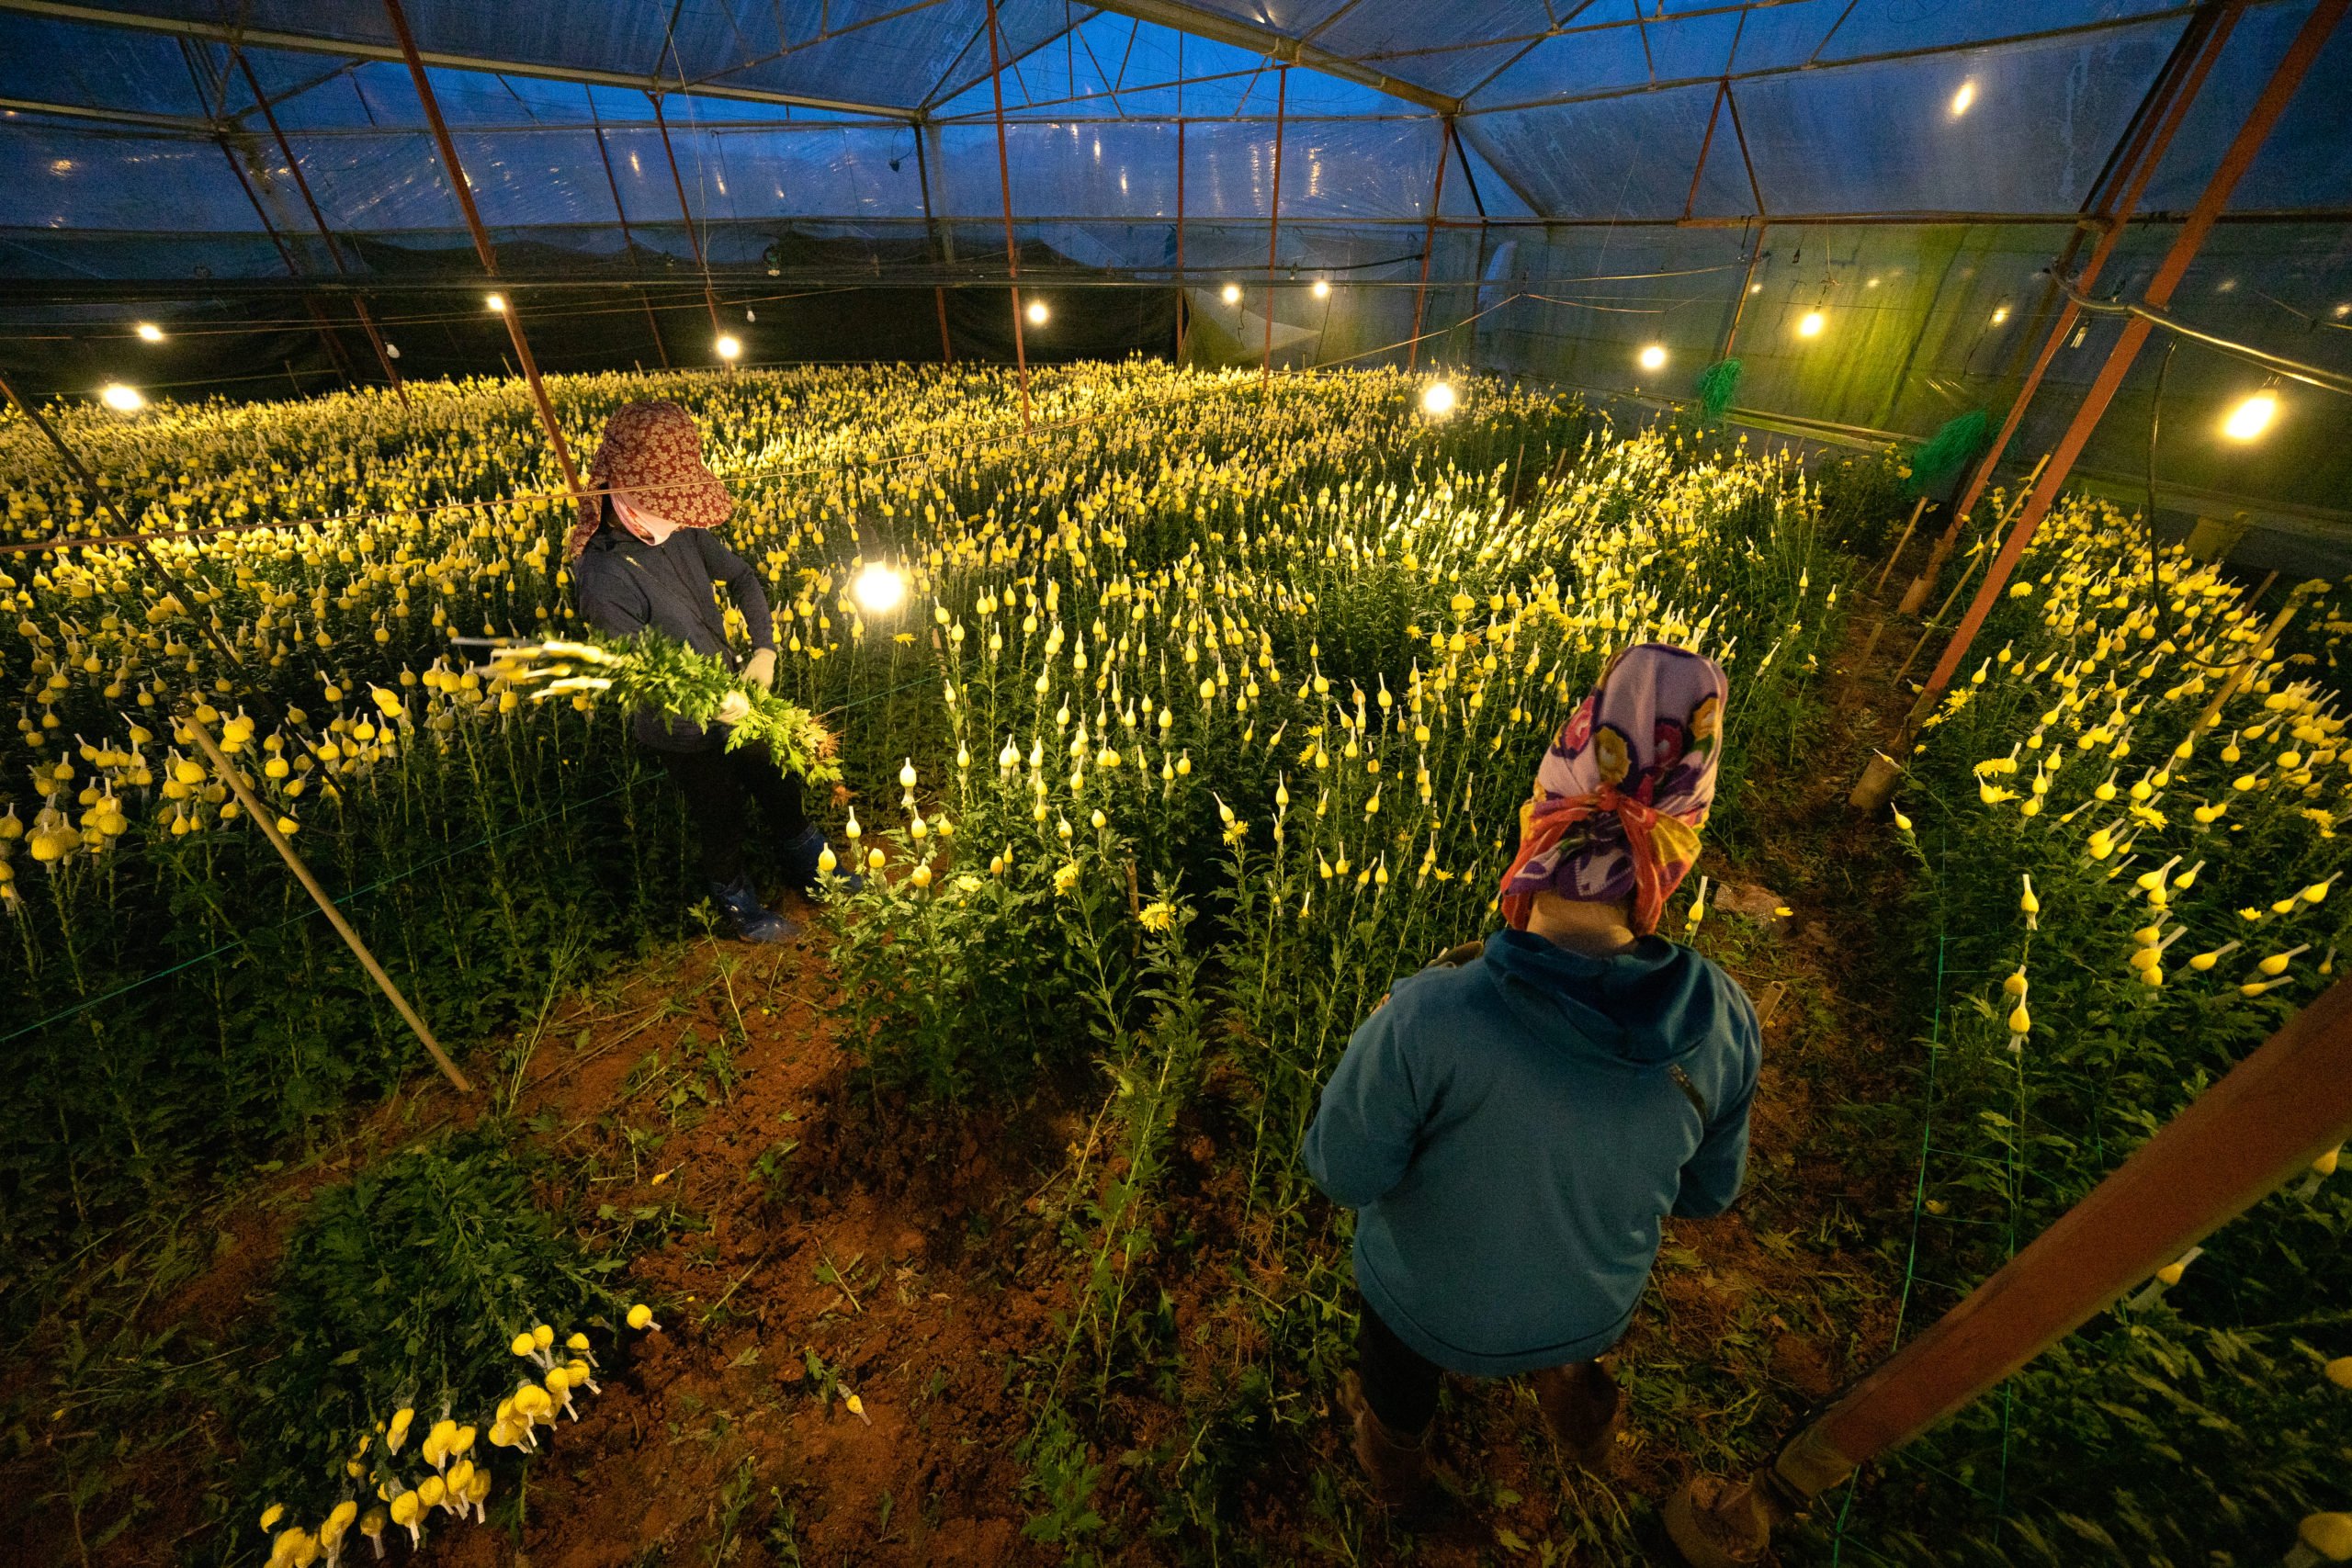 people cutting flowers in lit up greenhouse at night